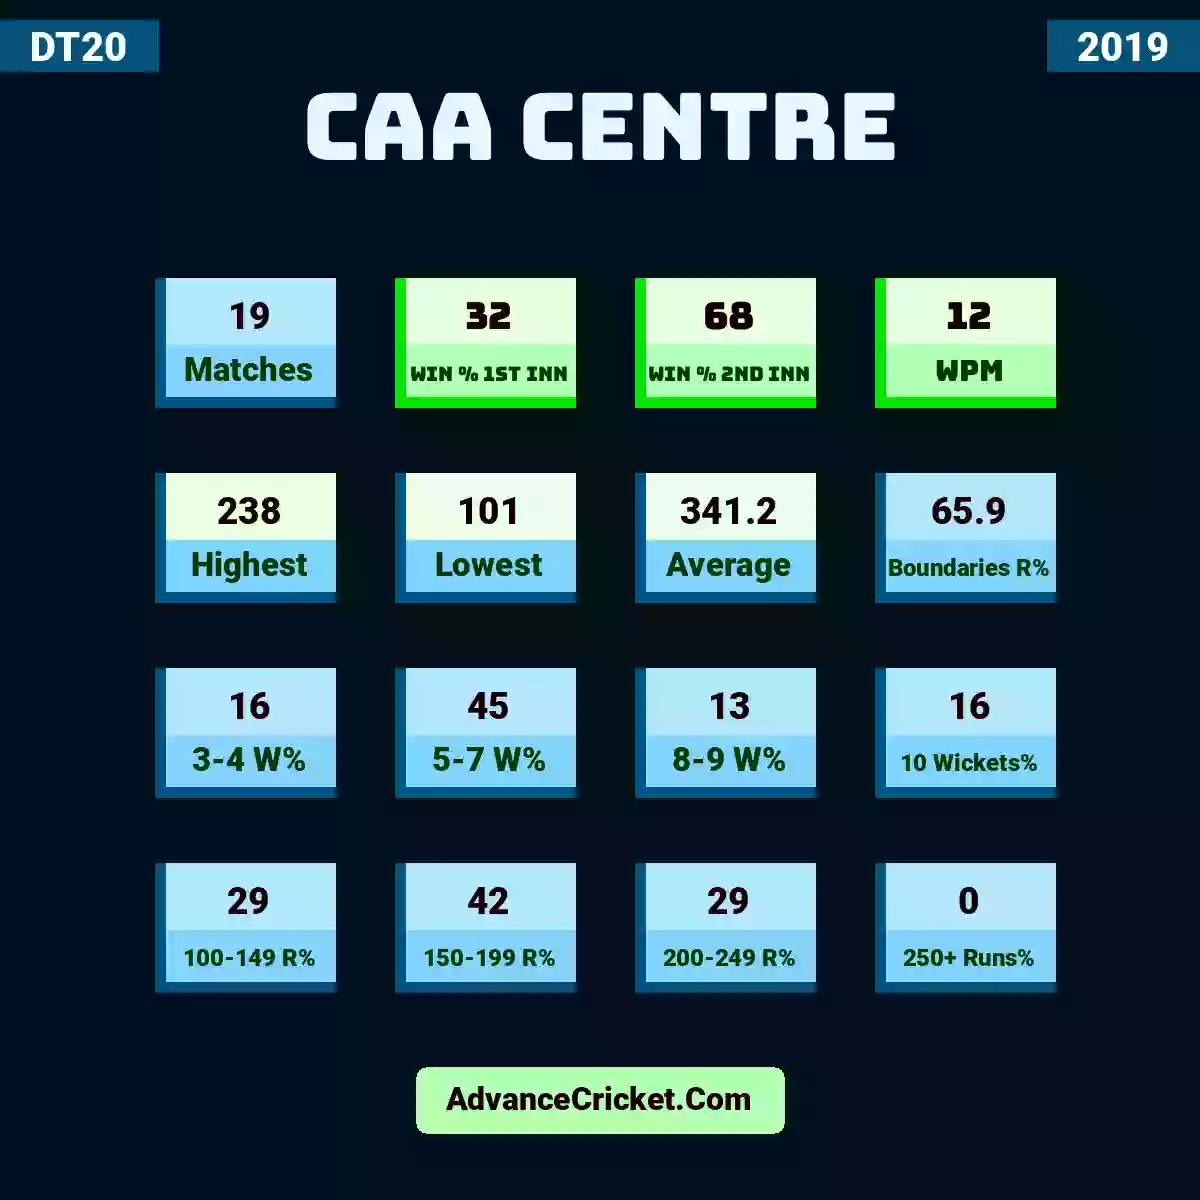 Image showing CAA Centre with Matches: 19, Win % 1st Inn: 32, Win % 2nd Inn: 68, WPM: 12, Highest: 238, Lowest: 101, Average: 341.2, Boundaries R%: 65.9, 3-4 W%: 16, 5-7 W%: 45, 8-9 W%: 13, 10 Wickets%: 16, 100-149 R%: 29, 150-199 R%: 42, 200-249 R%: 29, 250+ Runs%: 0.